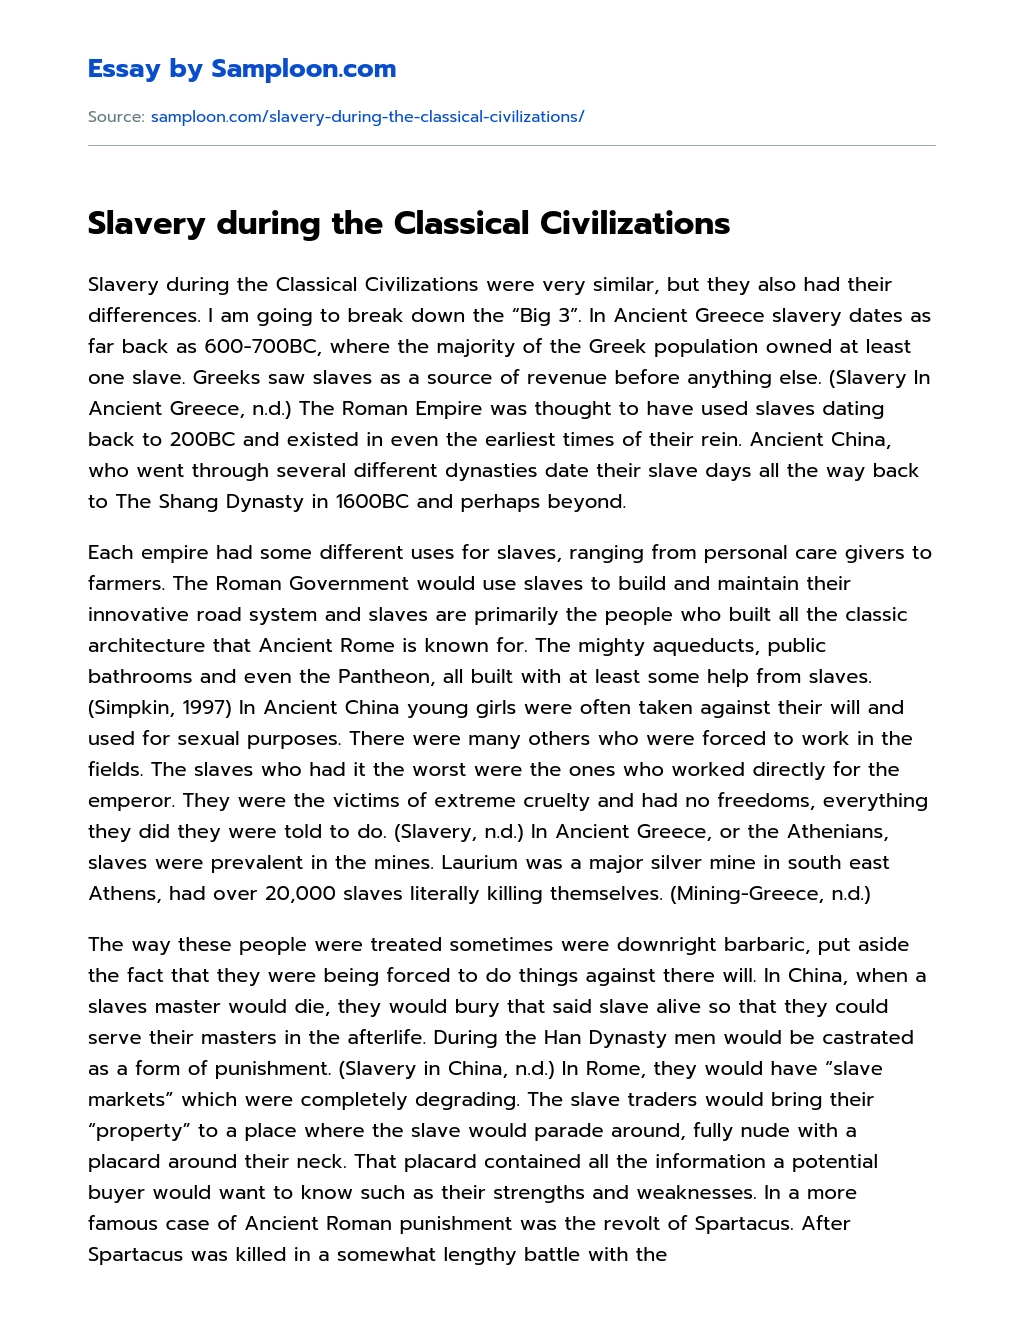 Slavery during the Classical Civilizations essay